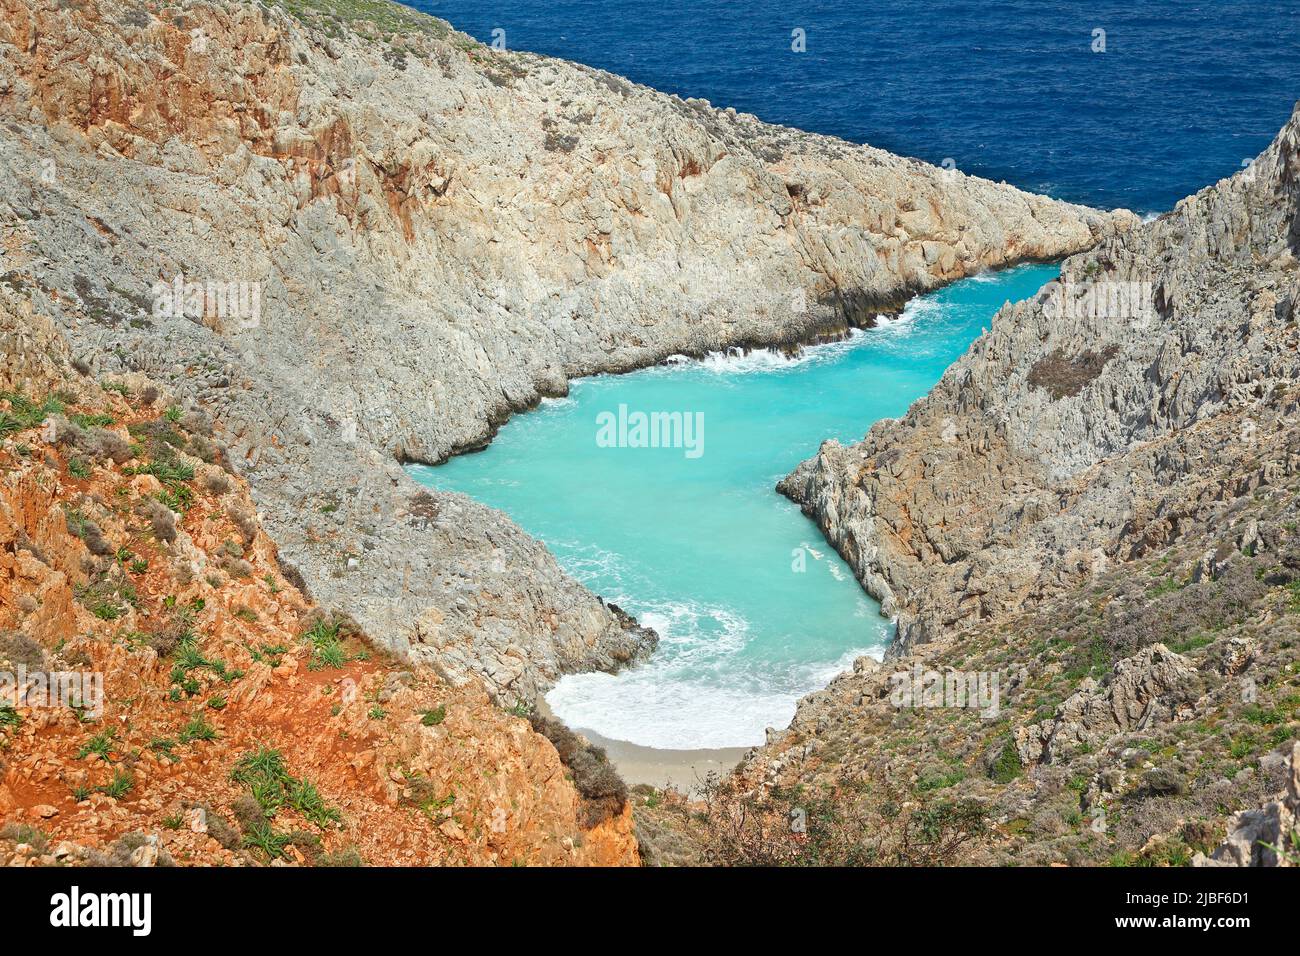 Amazing beach of Seitan Limania, a famous, magical shore of turquoise waters. Located in Akrotiri peninsula, very close to Chania town, in Crete islan Stock Photo